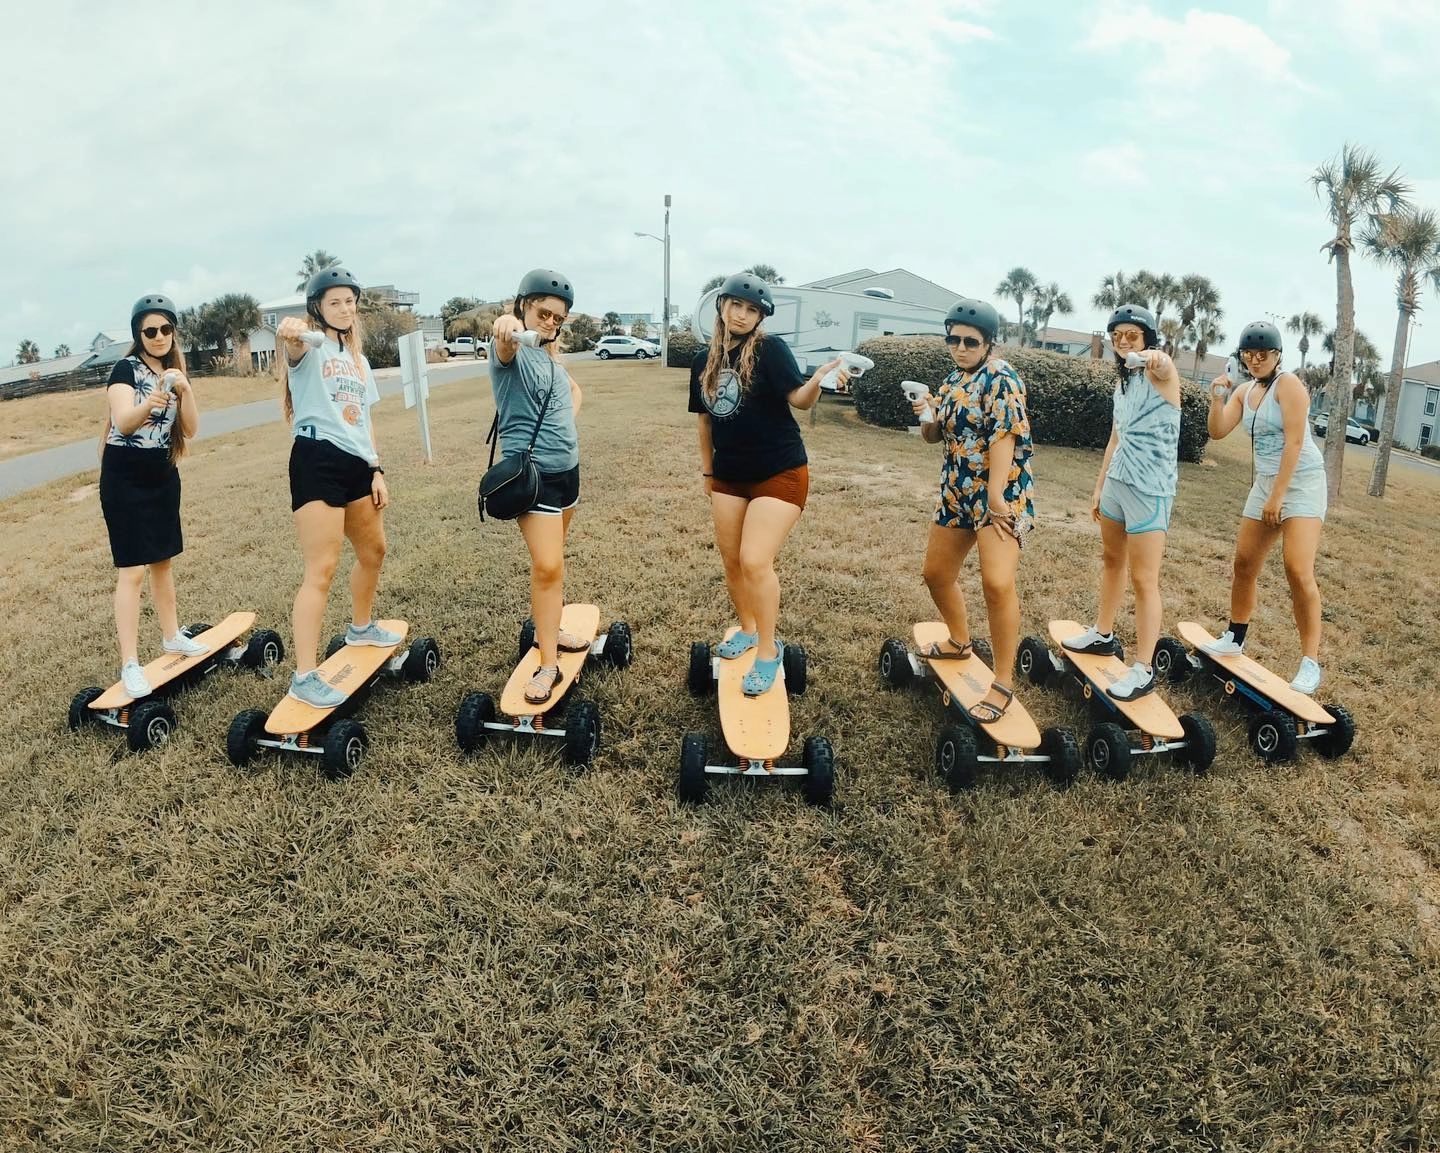 Girls, Bachelorette Party, Electric Skateboard Tours, Fun, Excitement, Electric Scooters